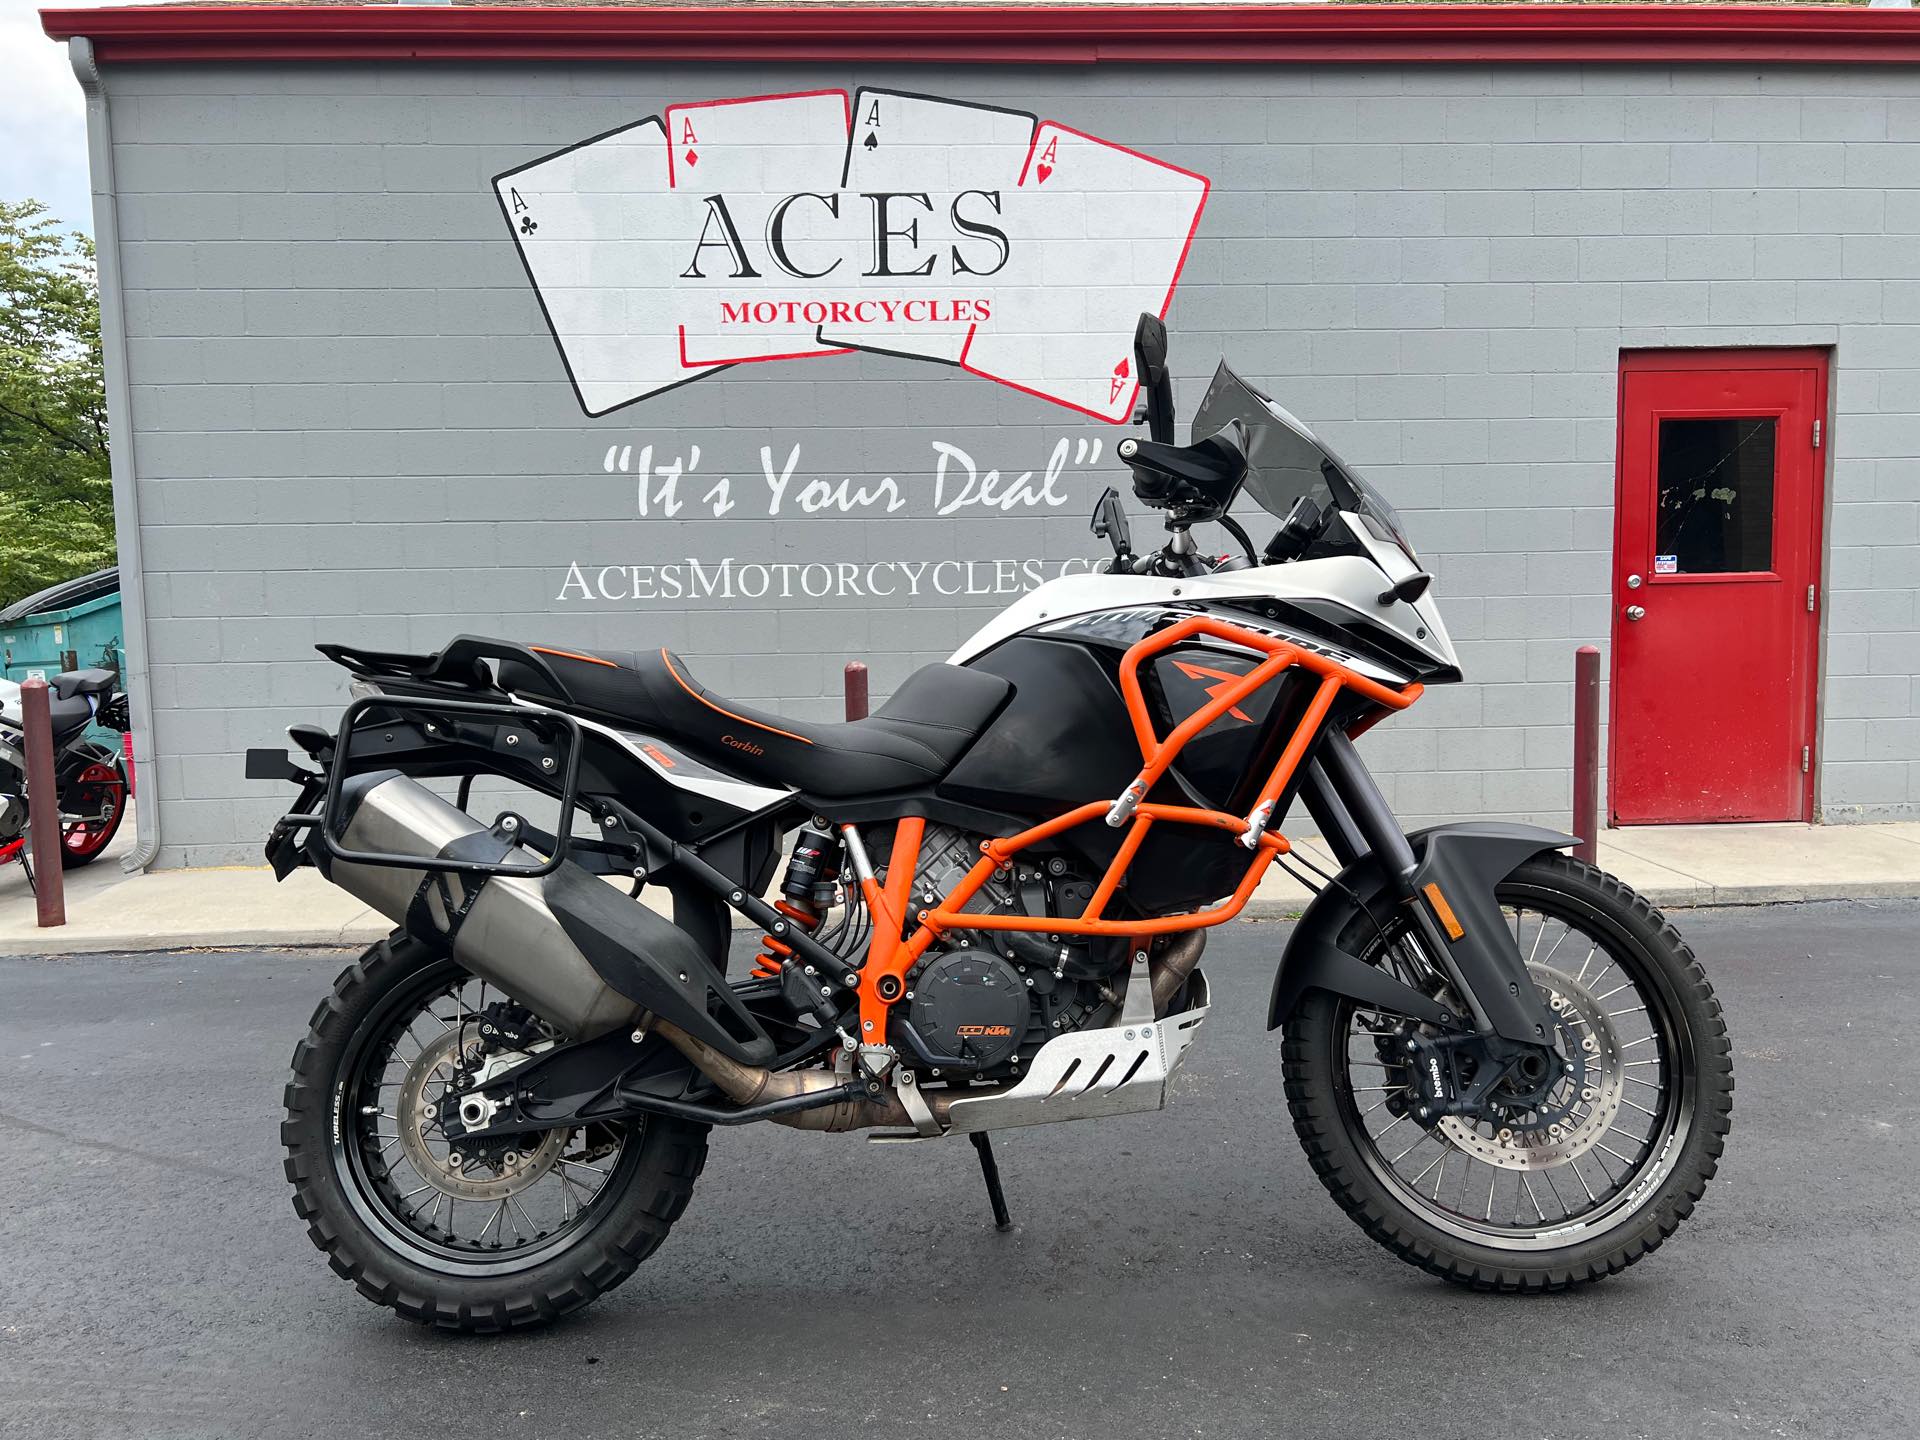 2016 KTM Adventure 1190 R at Aces Motorcycles - Fort Collins